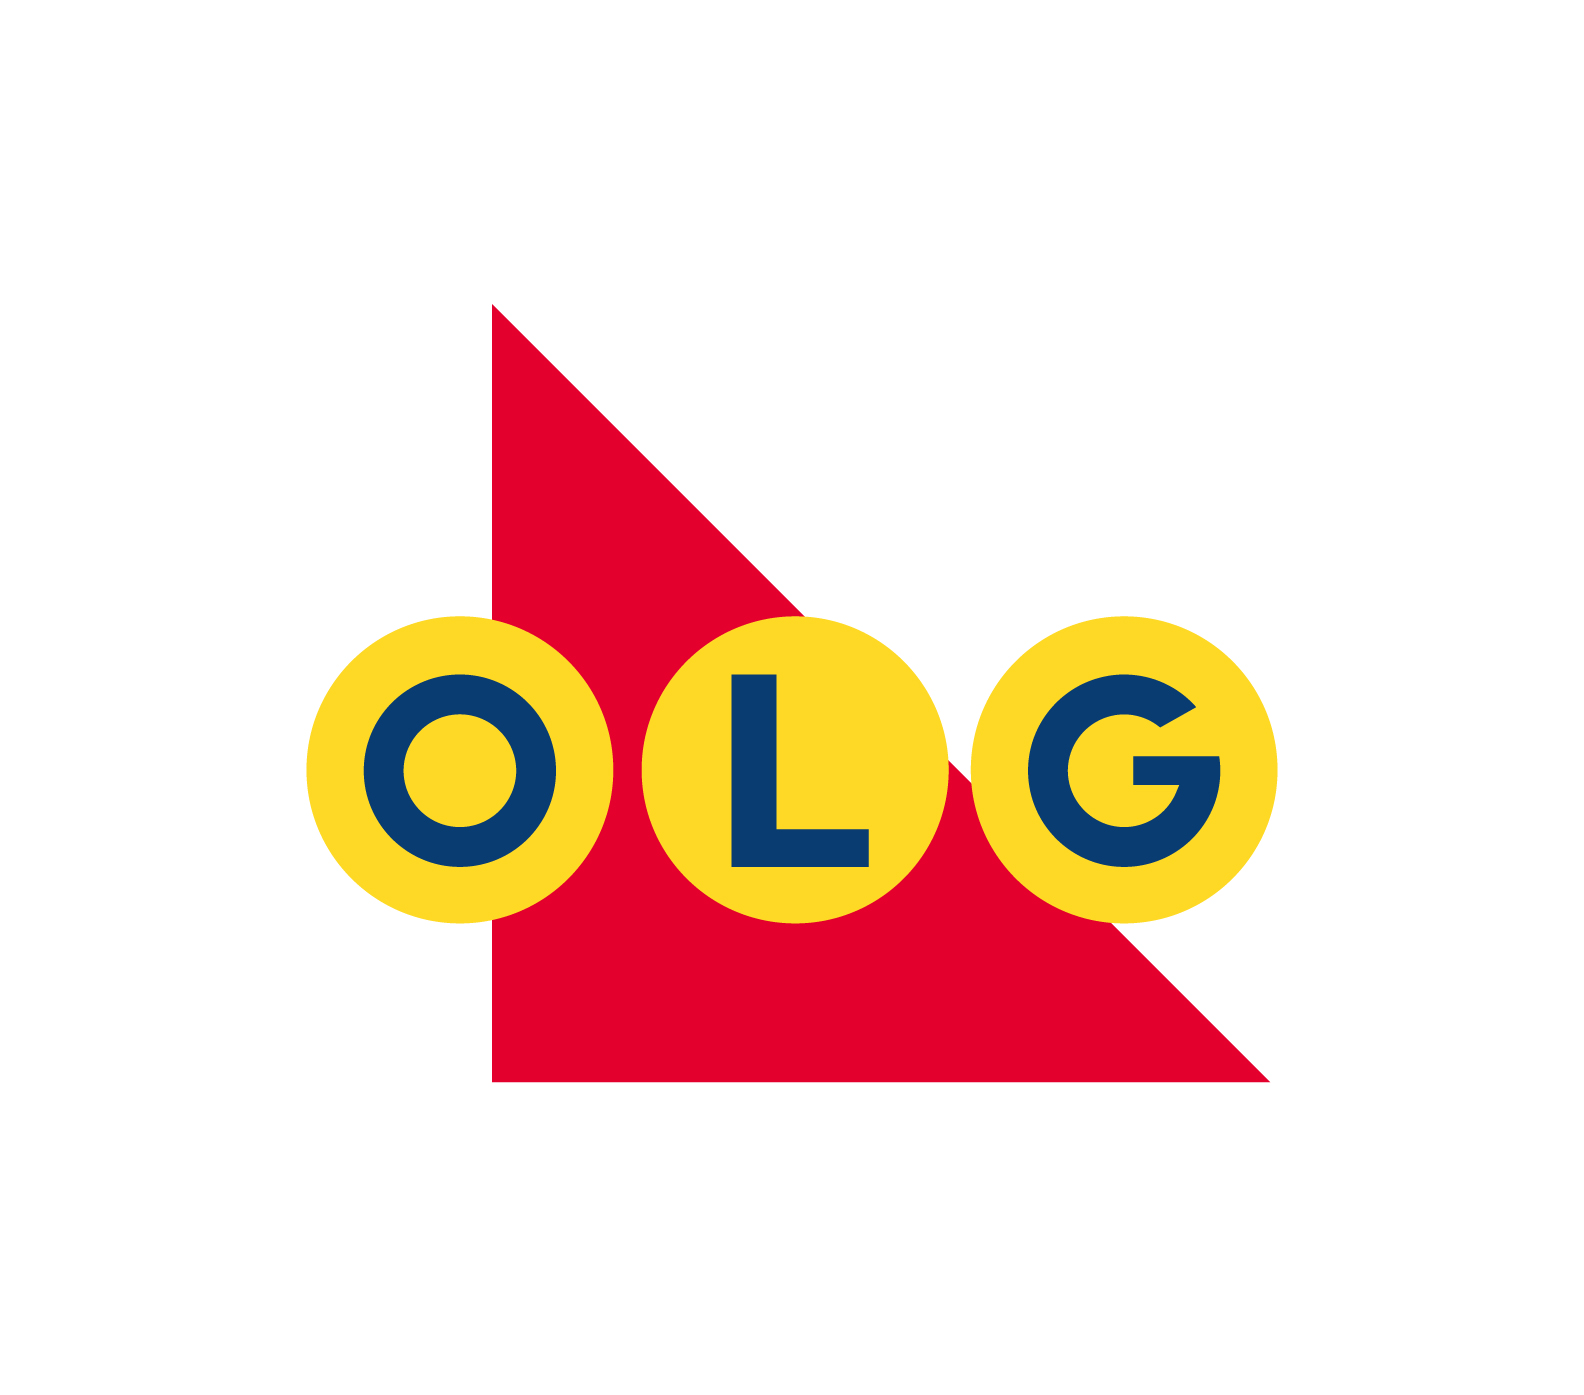 Organization logo of Ontario Lottery and Gaming Corporation (OLG)